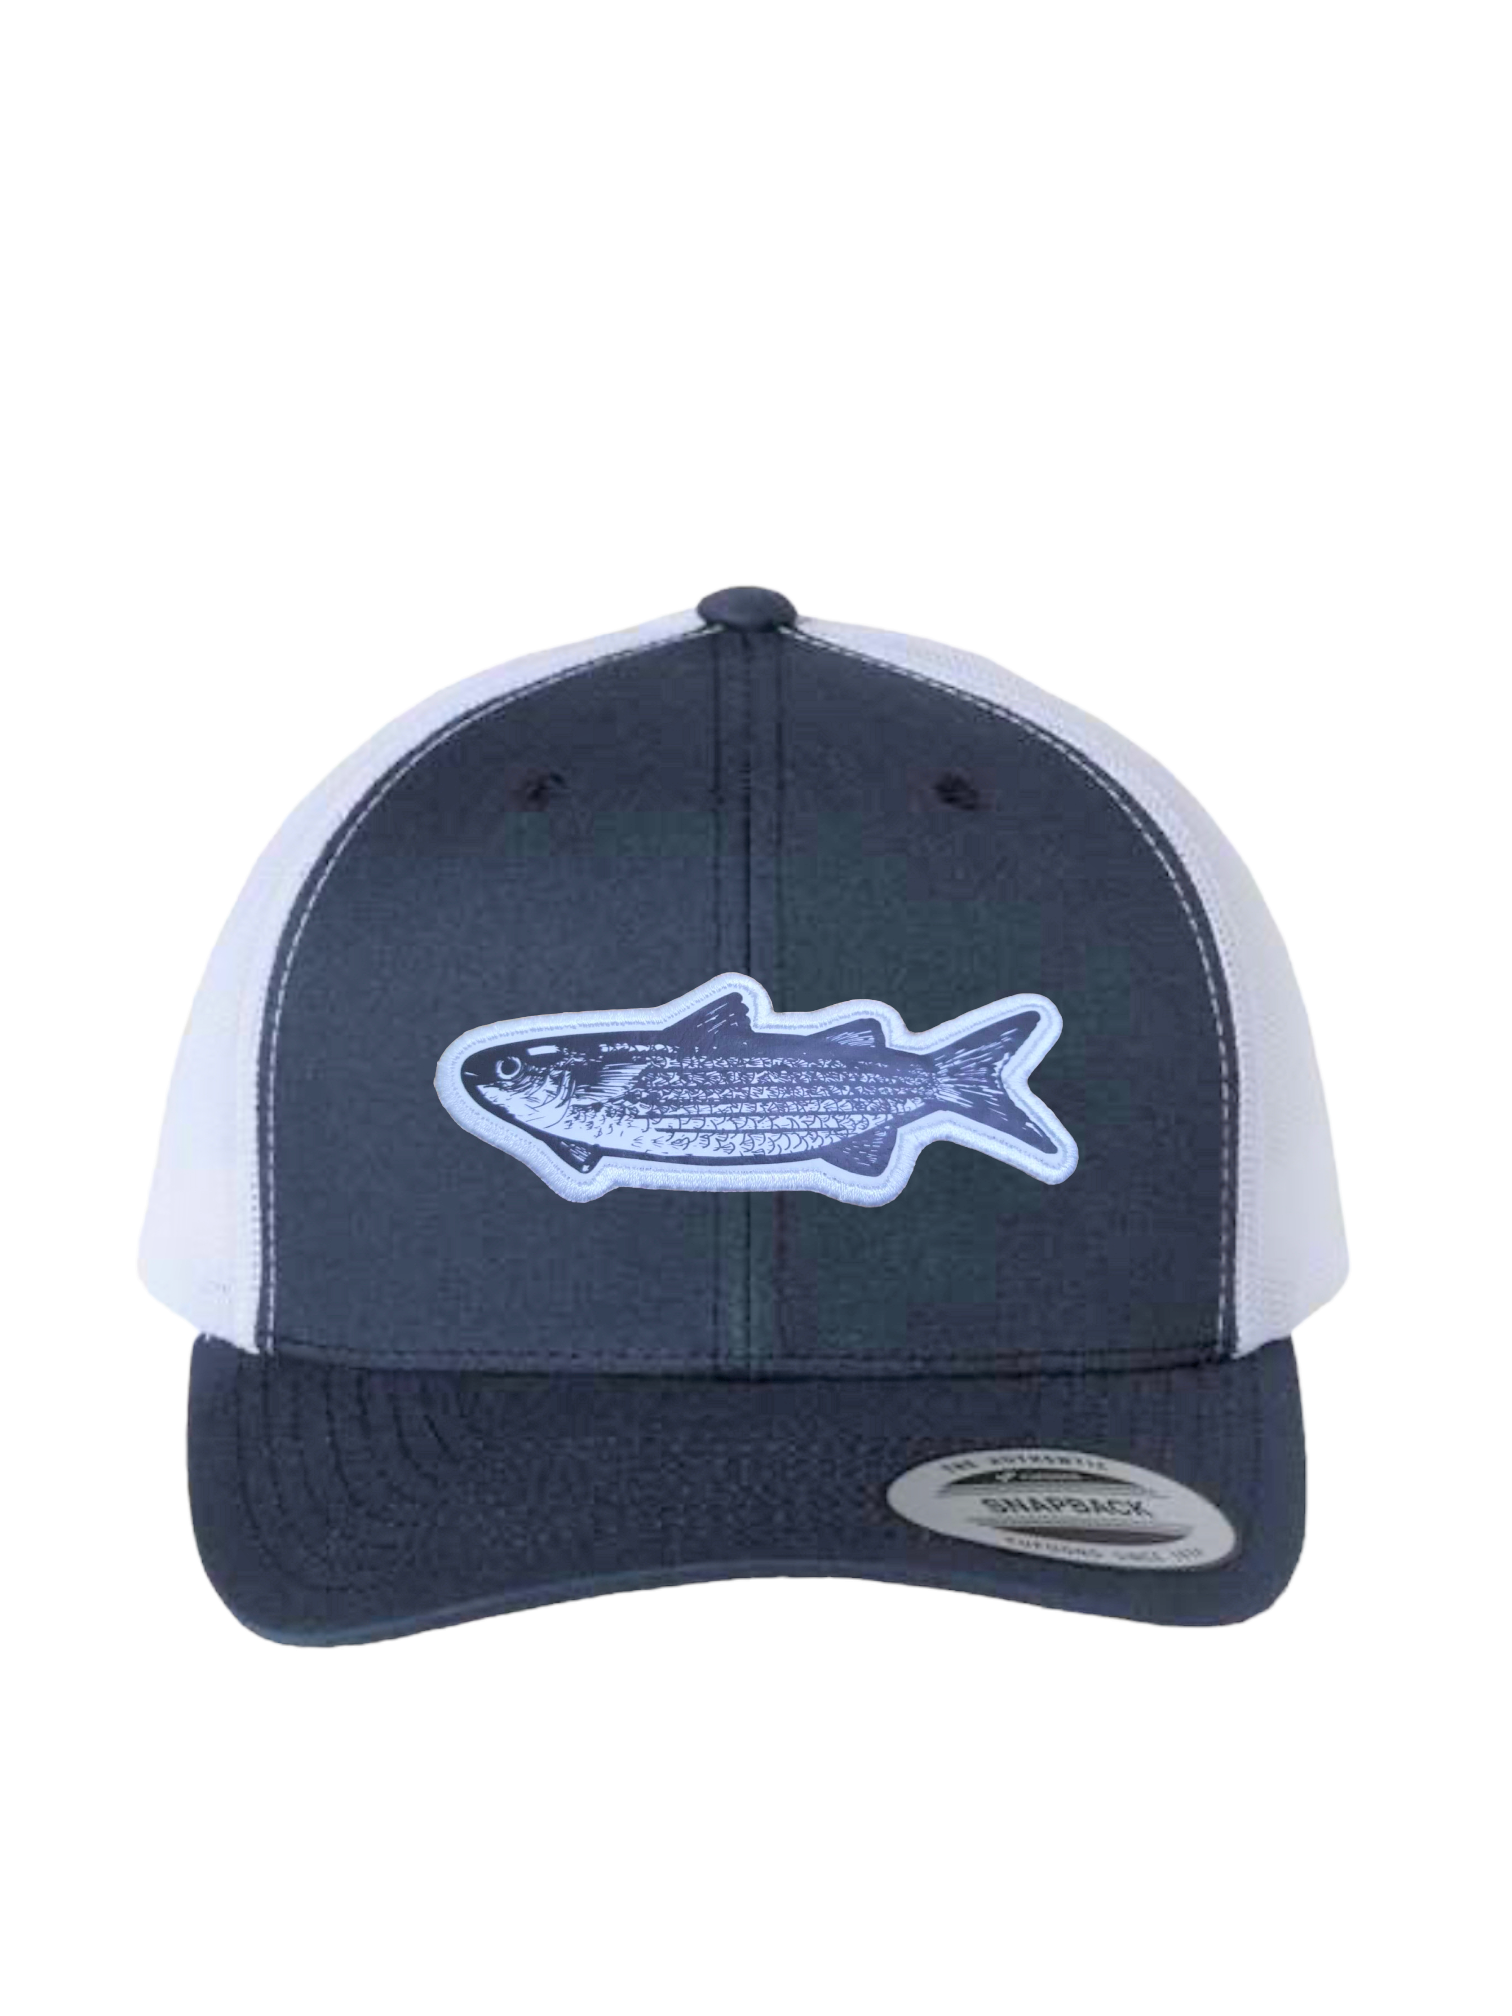 Adjustable Trucker Mullet Fish Patch Hats (Assorted Colors)